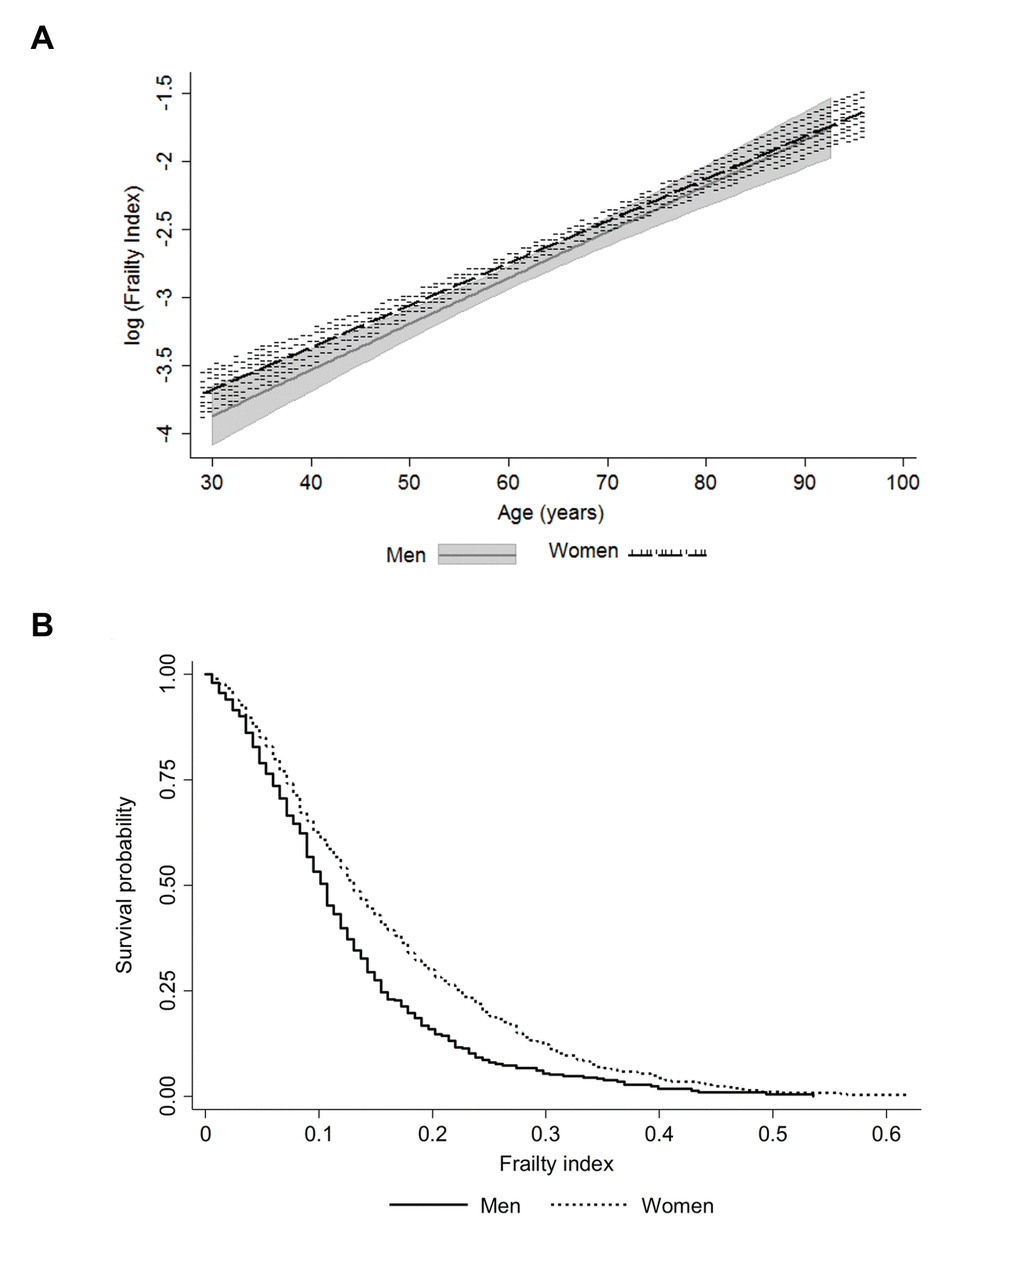 Association of the frailty index with age (a); the shaded areas around the lines represent the 95% confidence intervals for the mean) and mortality by sex (b).